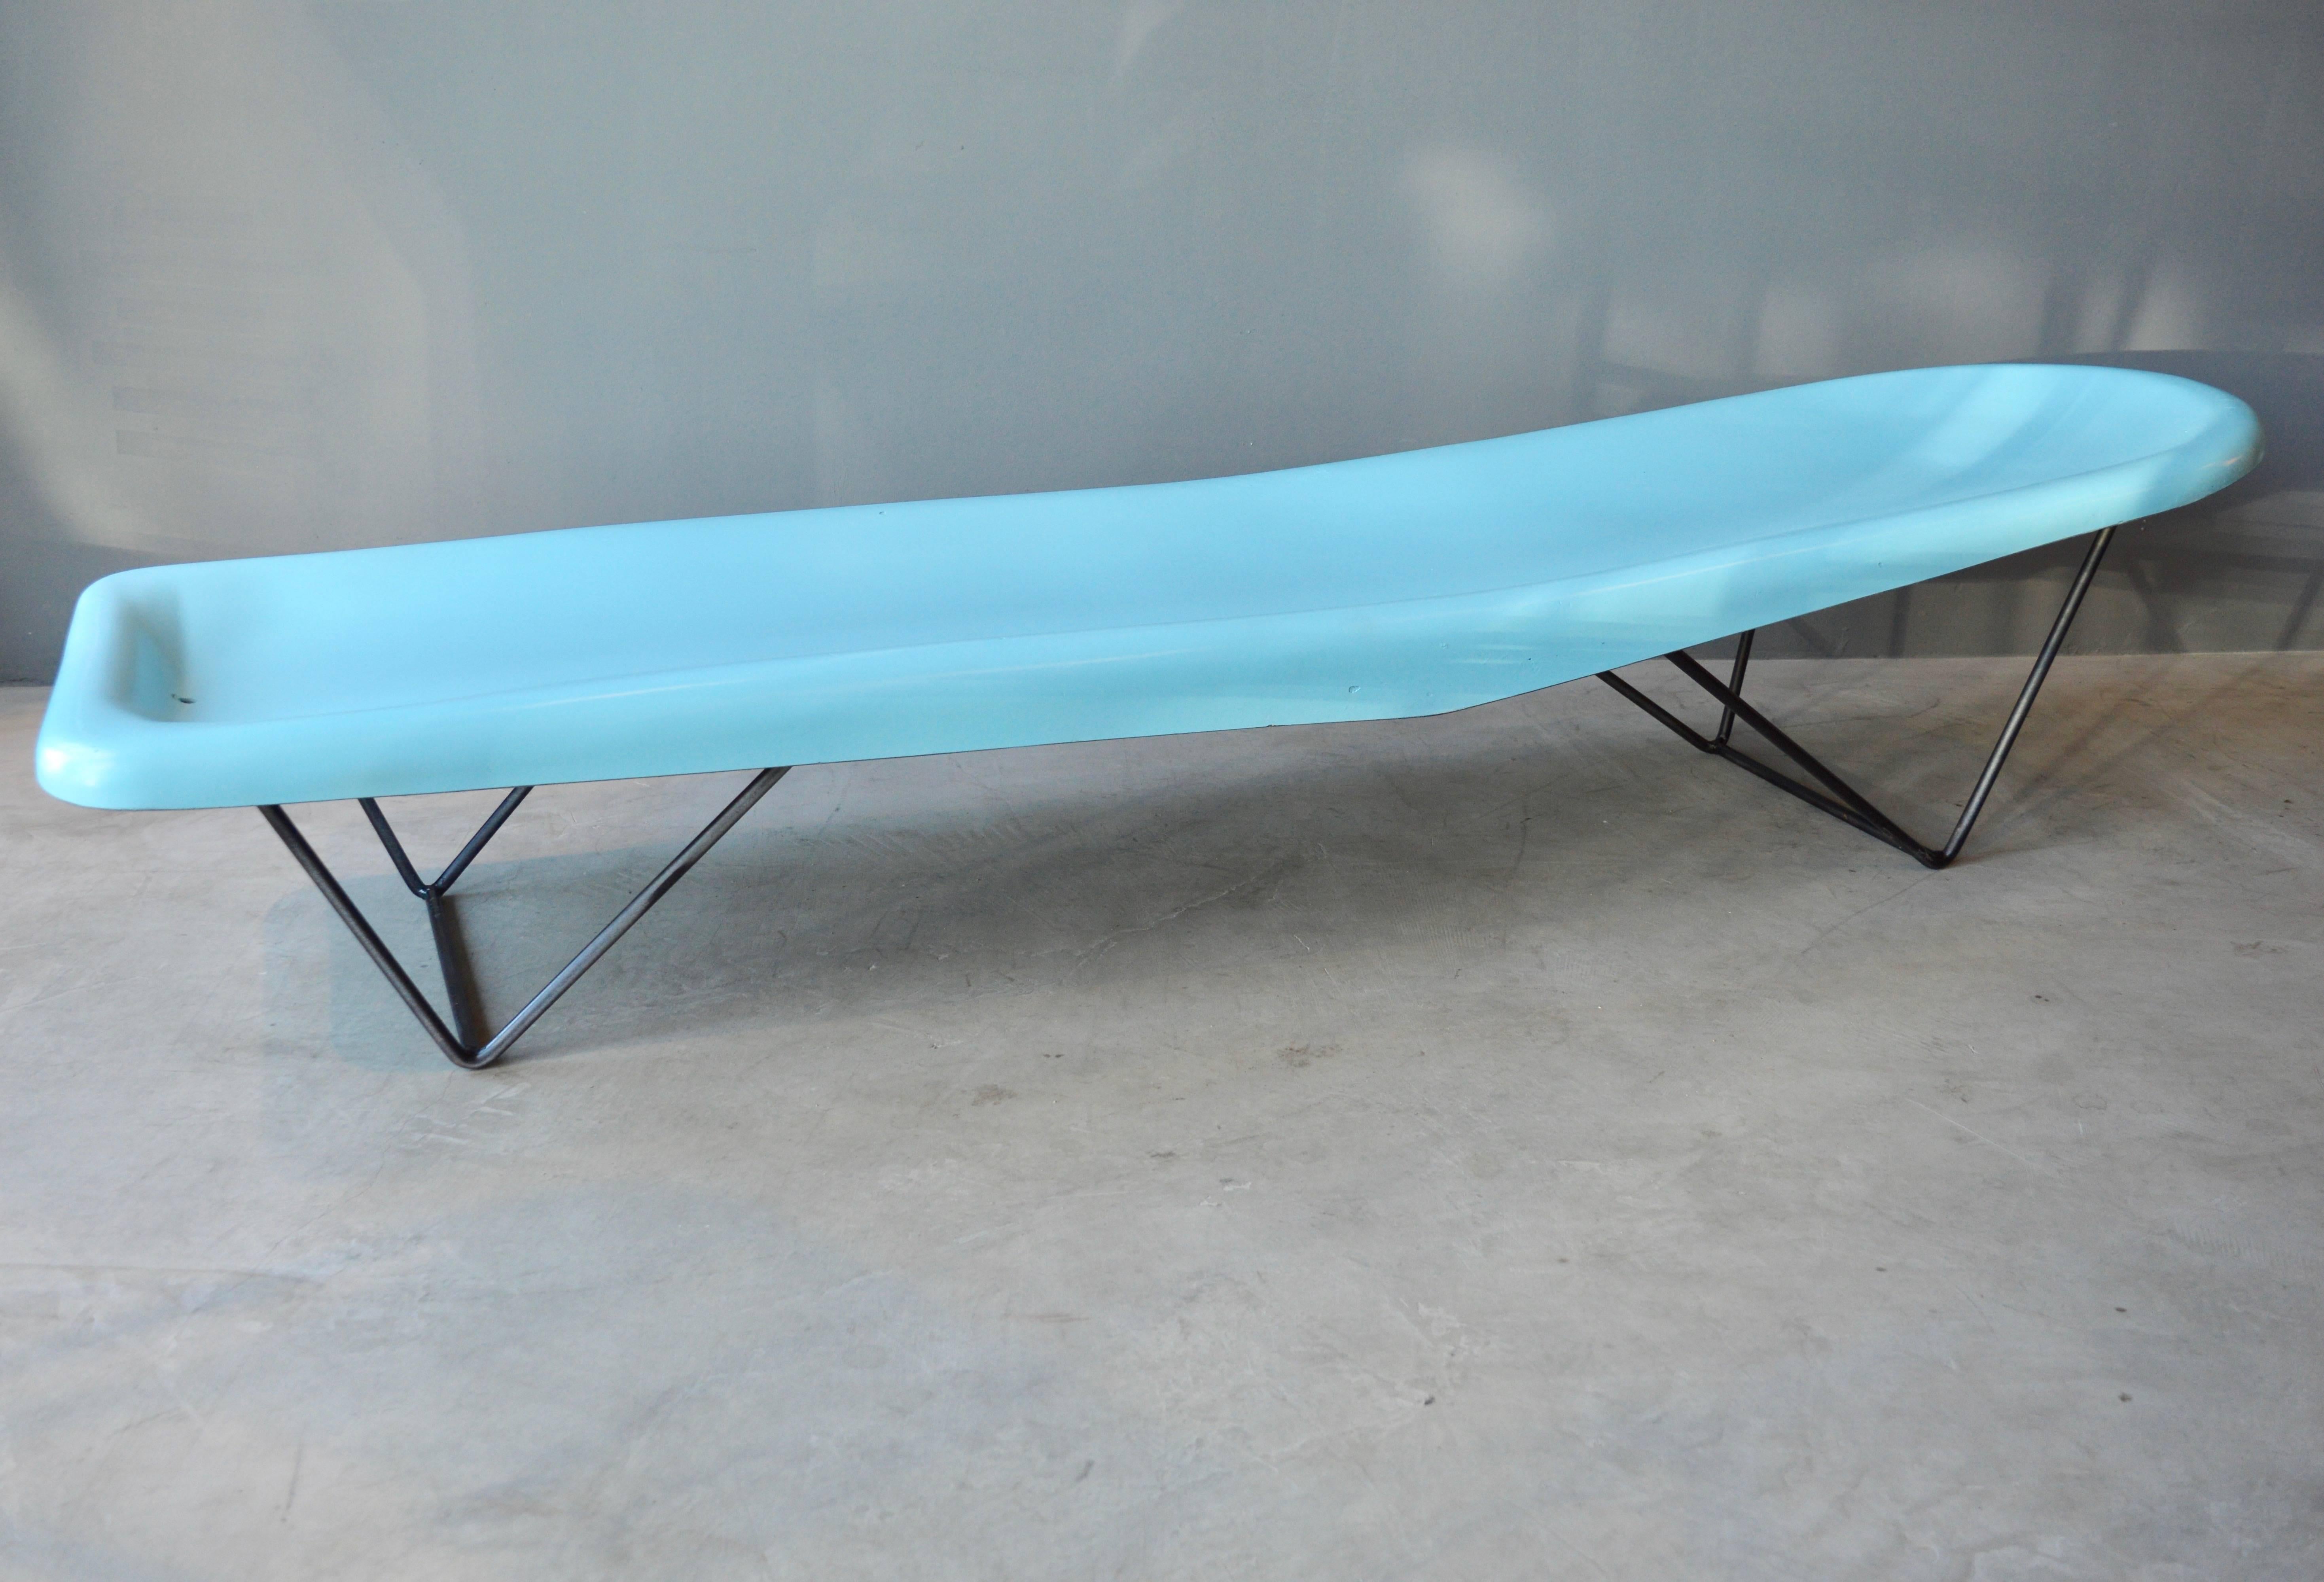 Stunning time capsule of two aqua colored, fiberglass lounge chairs by Fibrella. Made in the 1950s. Perfect for a Mid-Century poolside. Architectural iron base. Excellent vintage condition. Original blue color. $600 to have chairs repainted in color